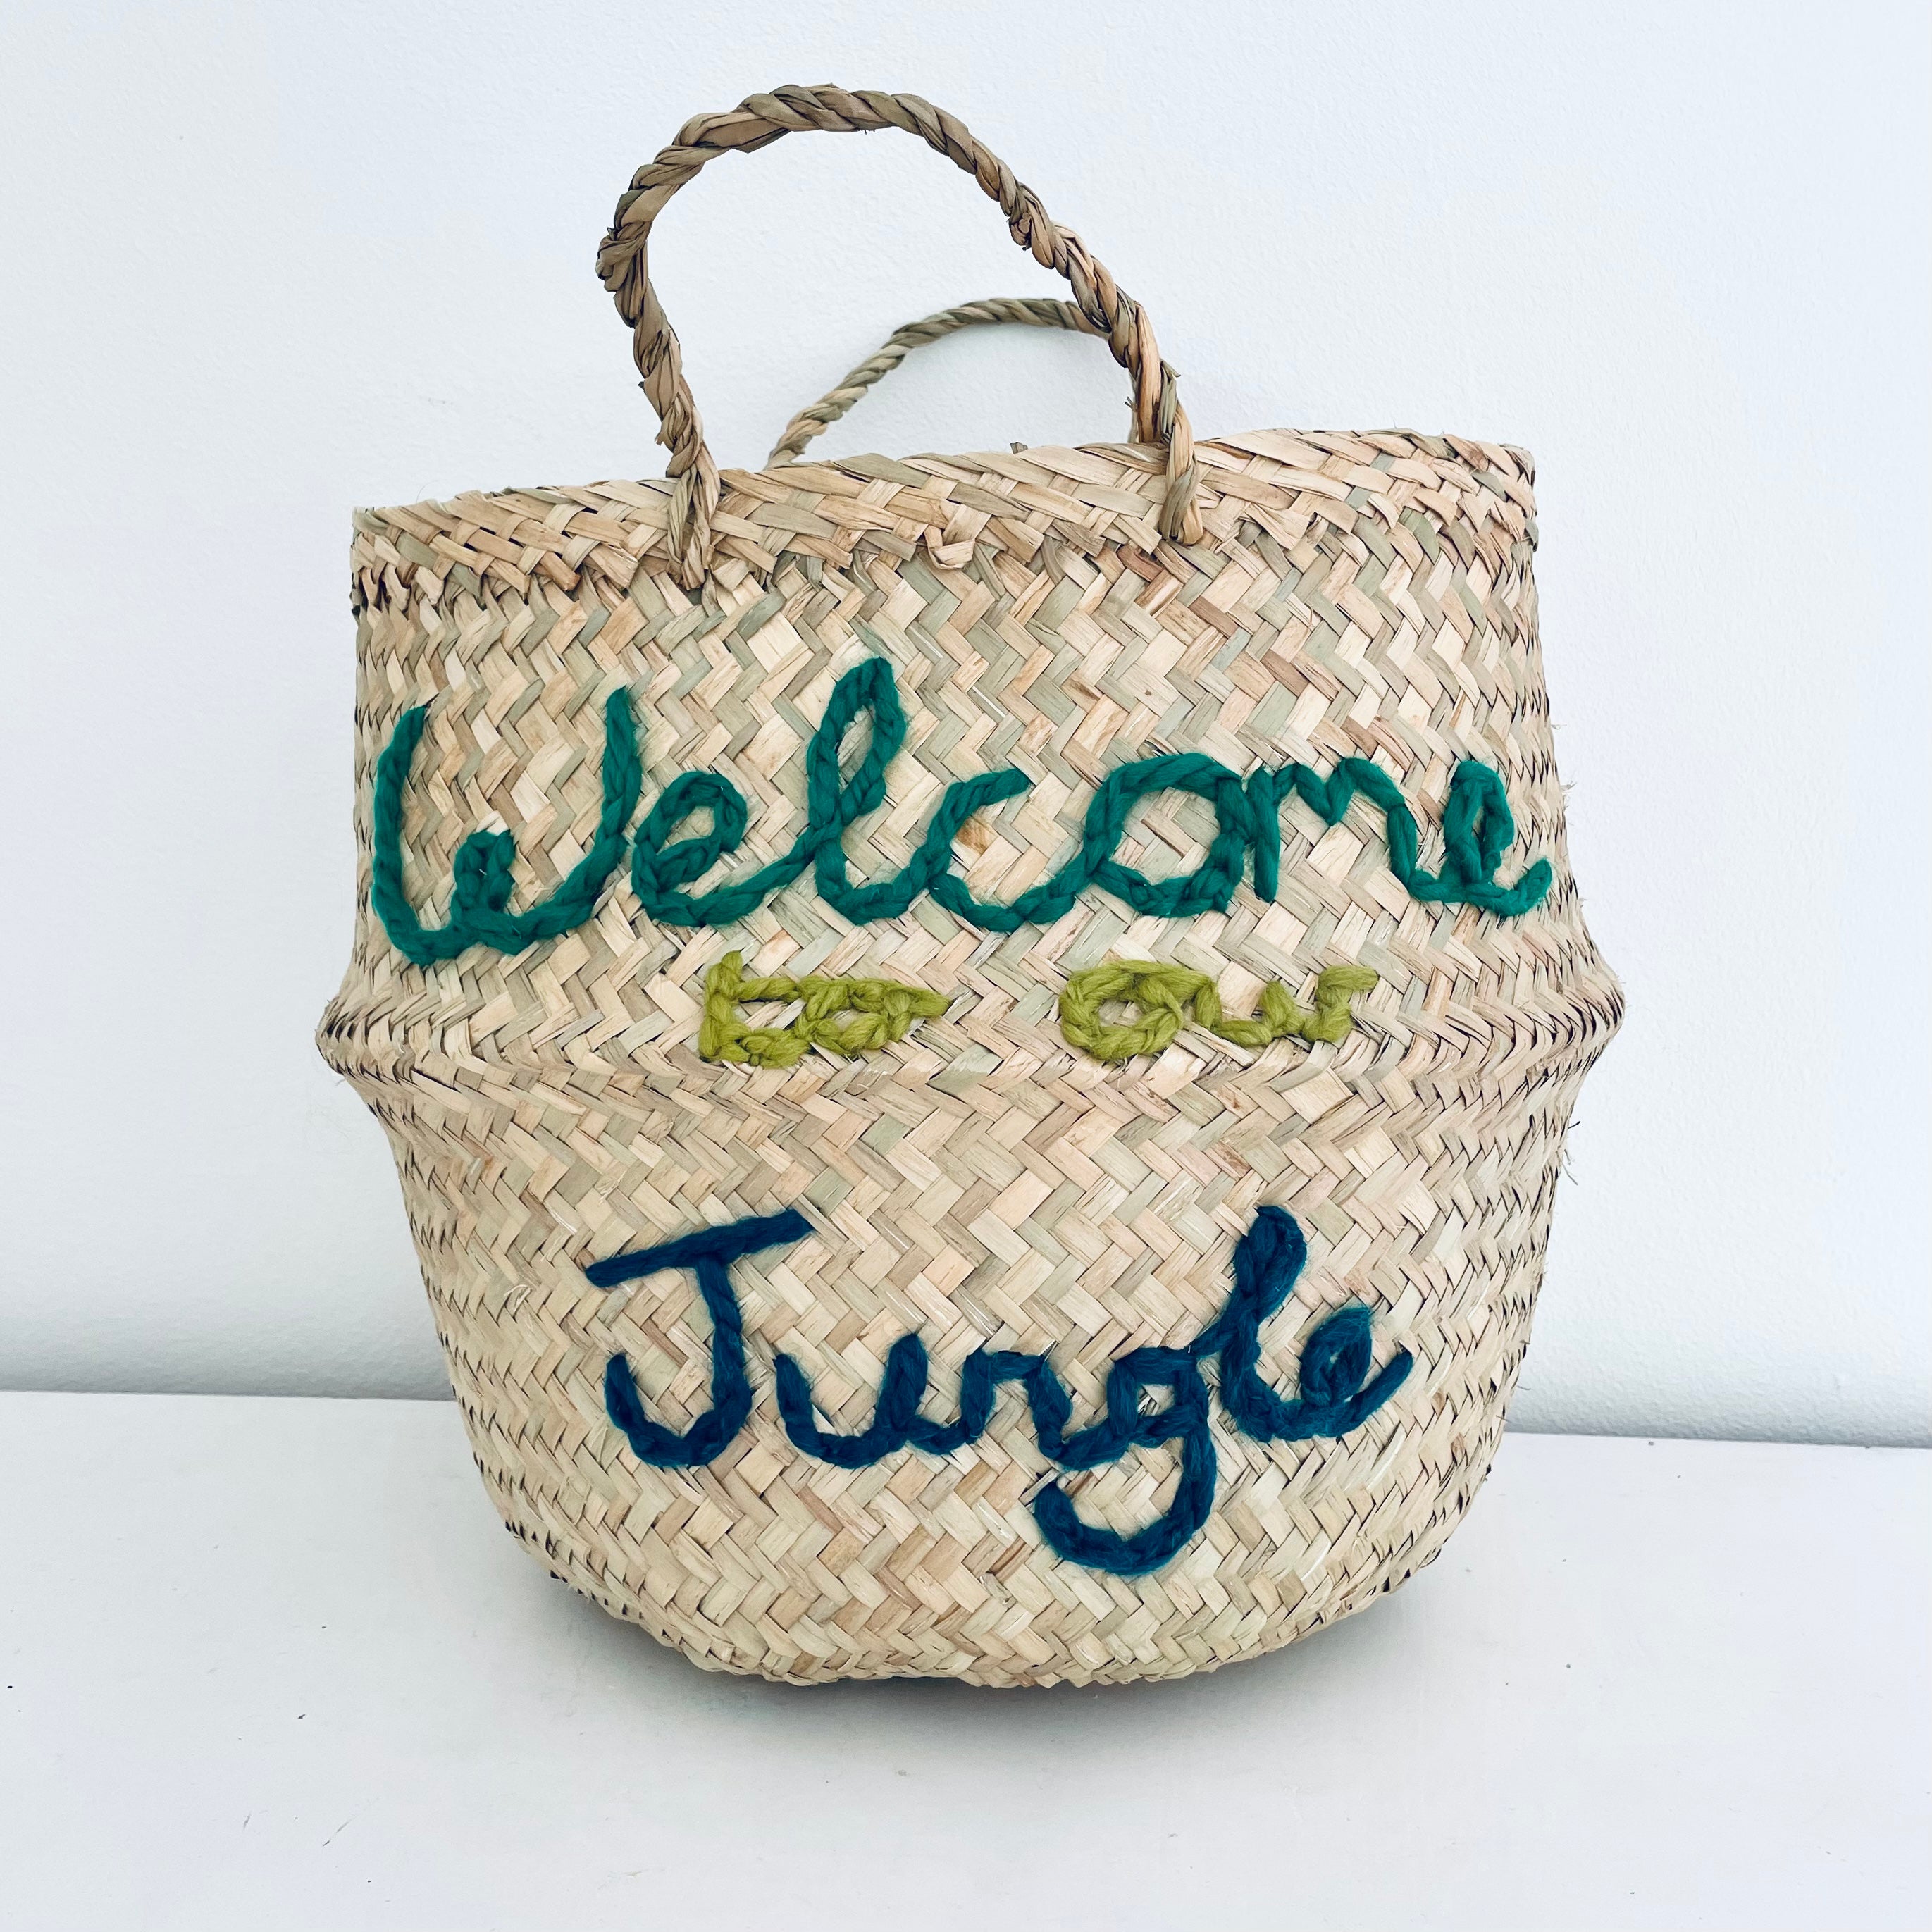 Welcome to our jungle basket - Large